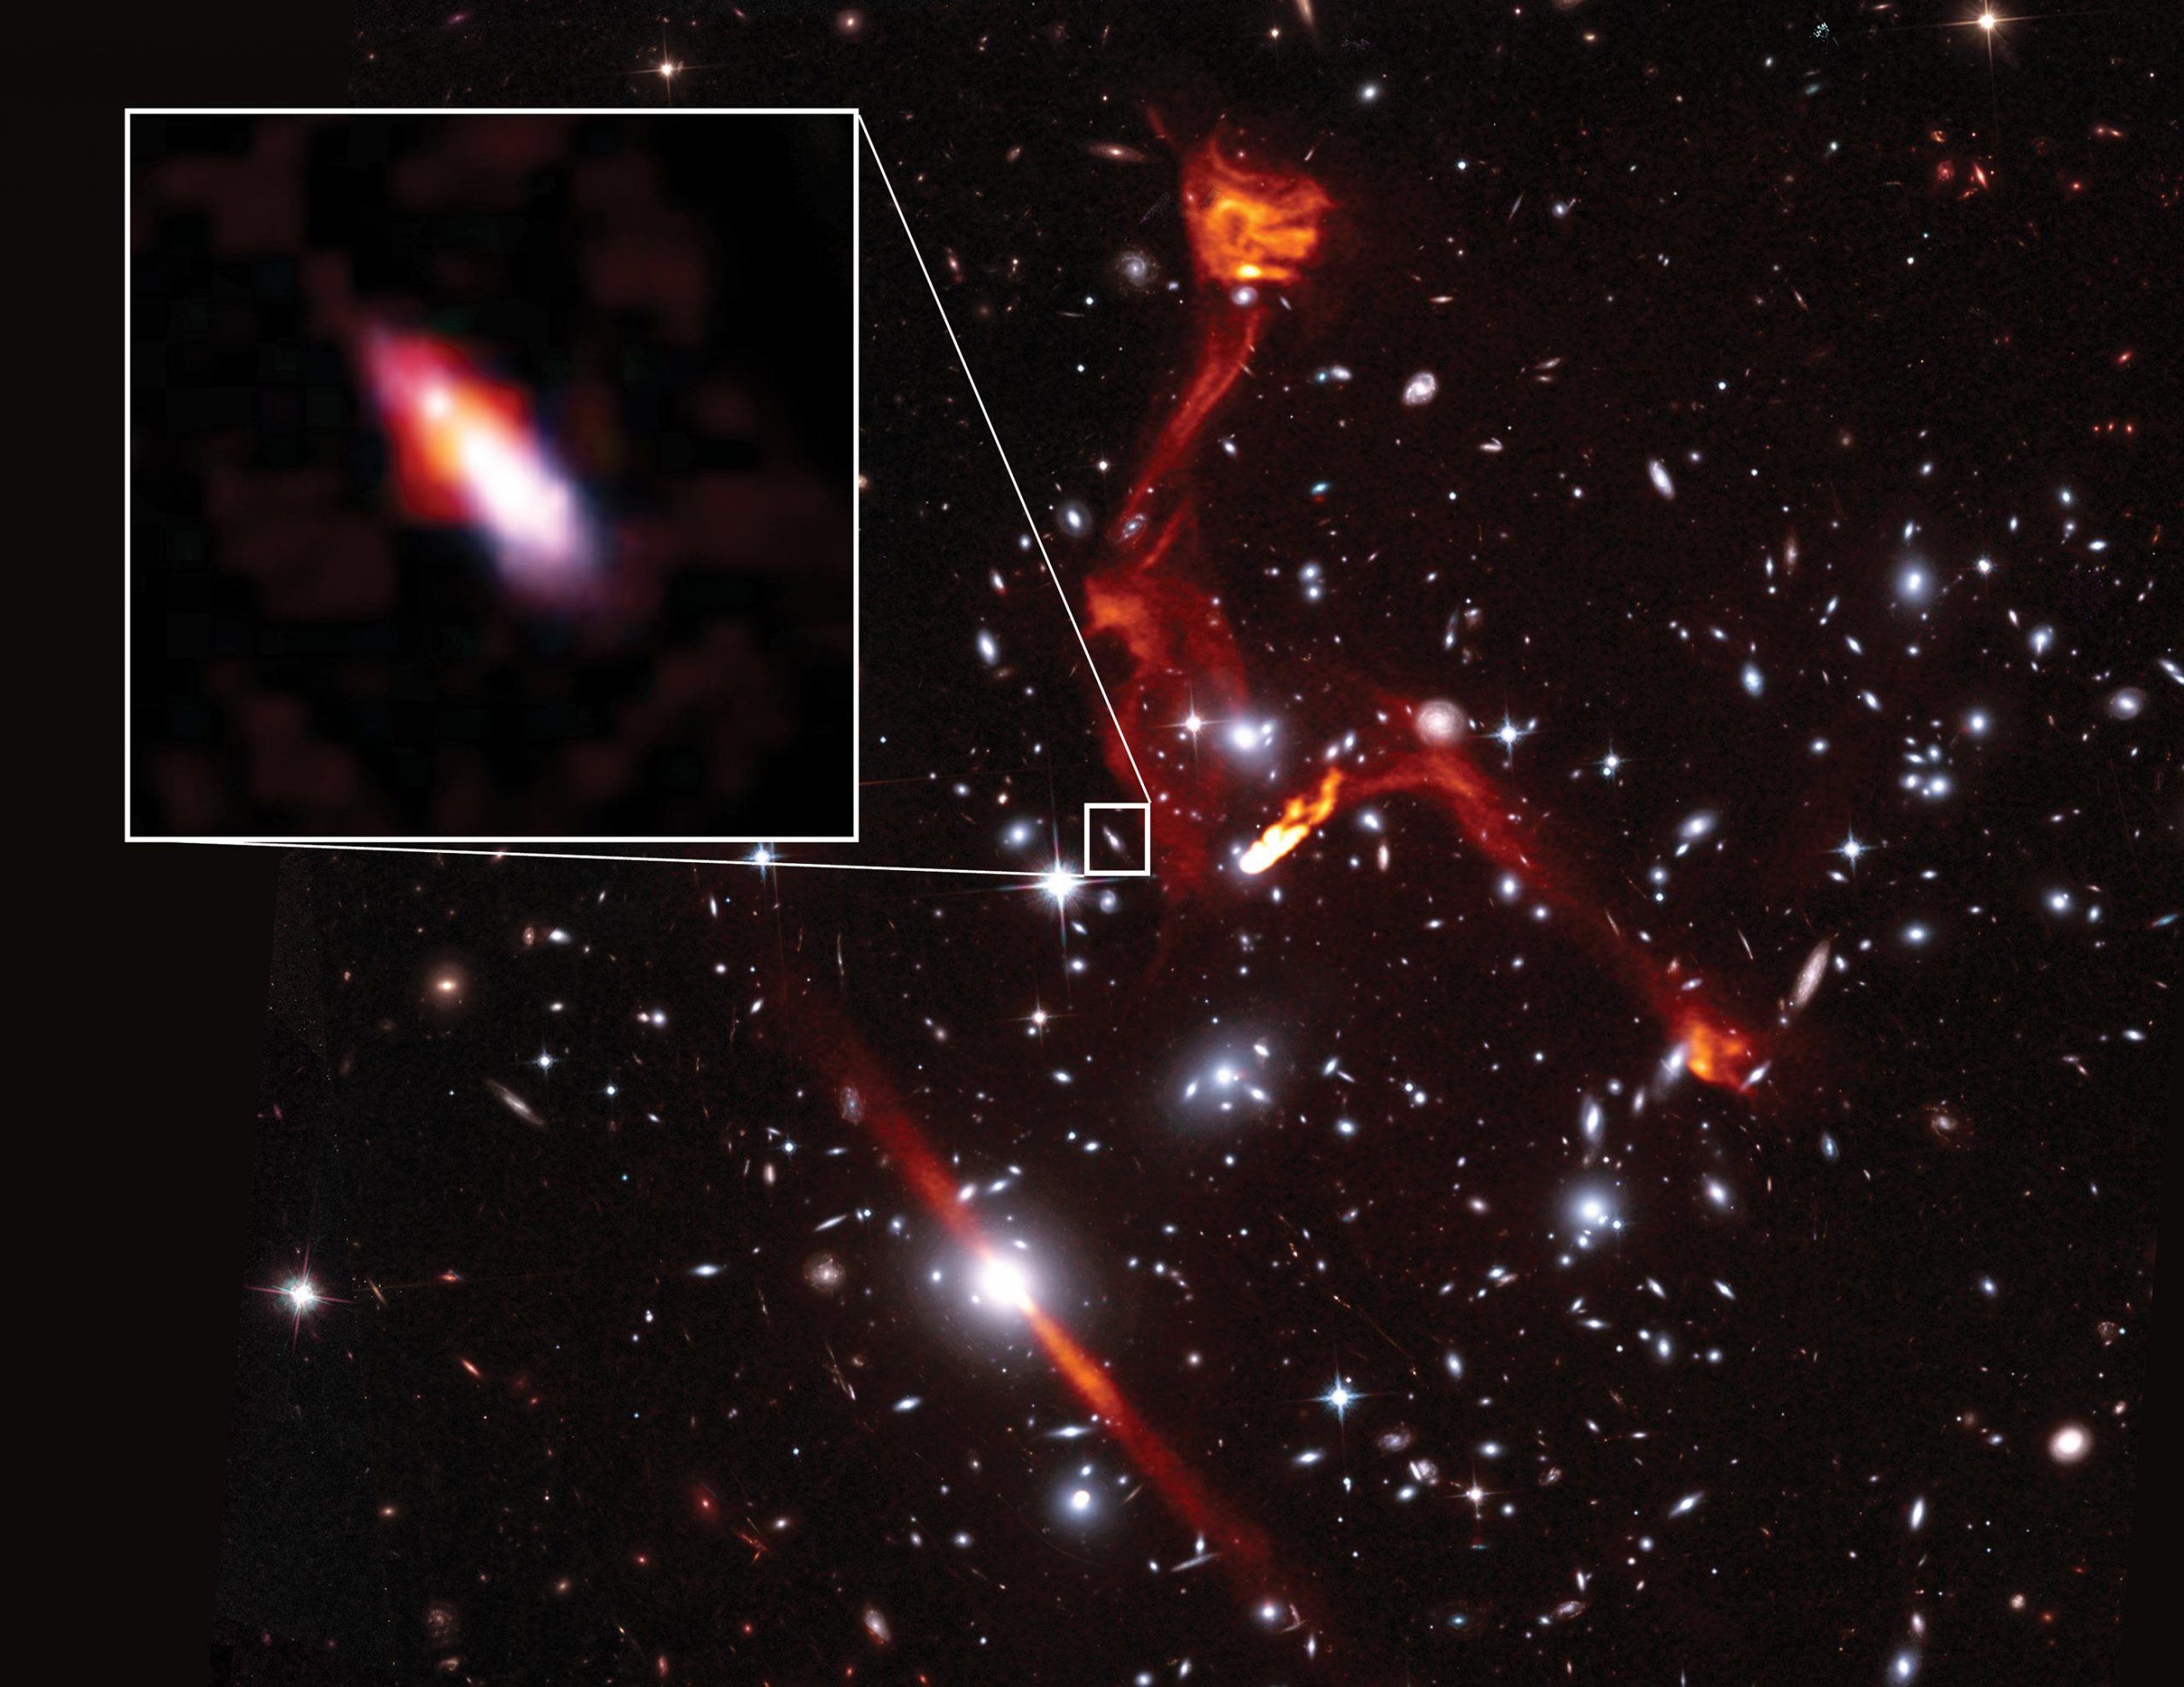 Cosmic Lens Reveals Faint Radio Galaxy More Than 8 Billion Light-Years From Earth